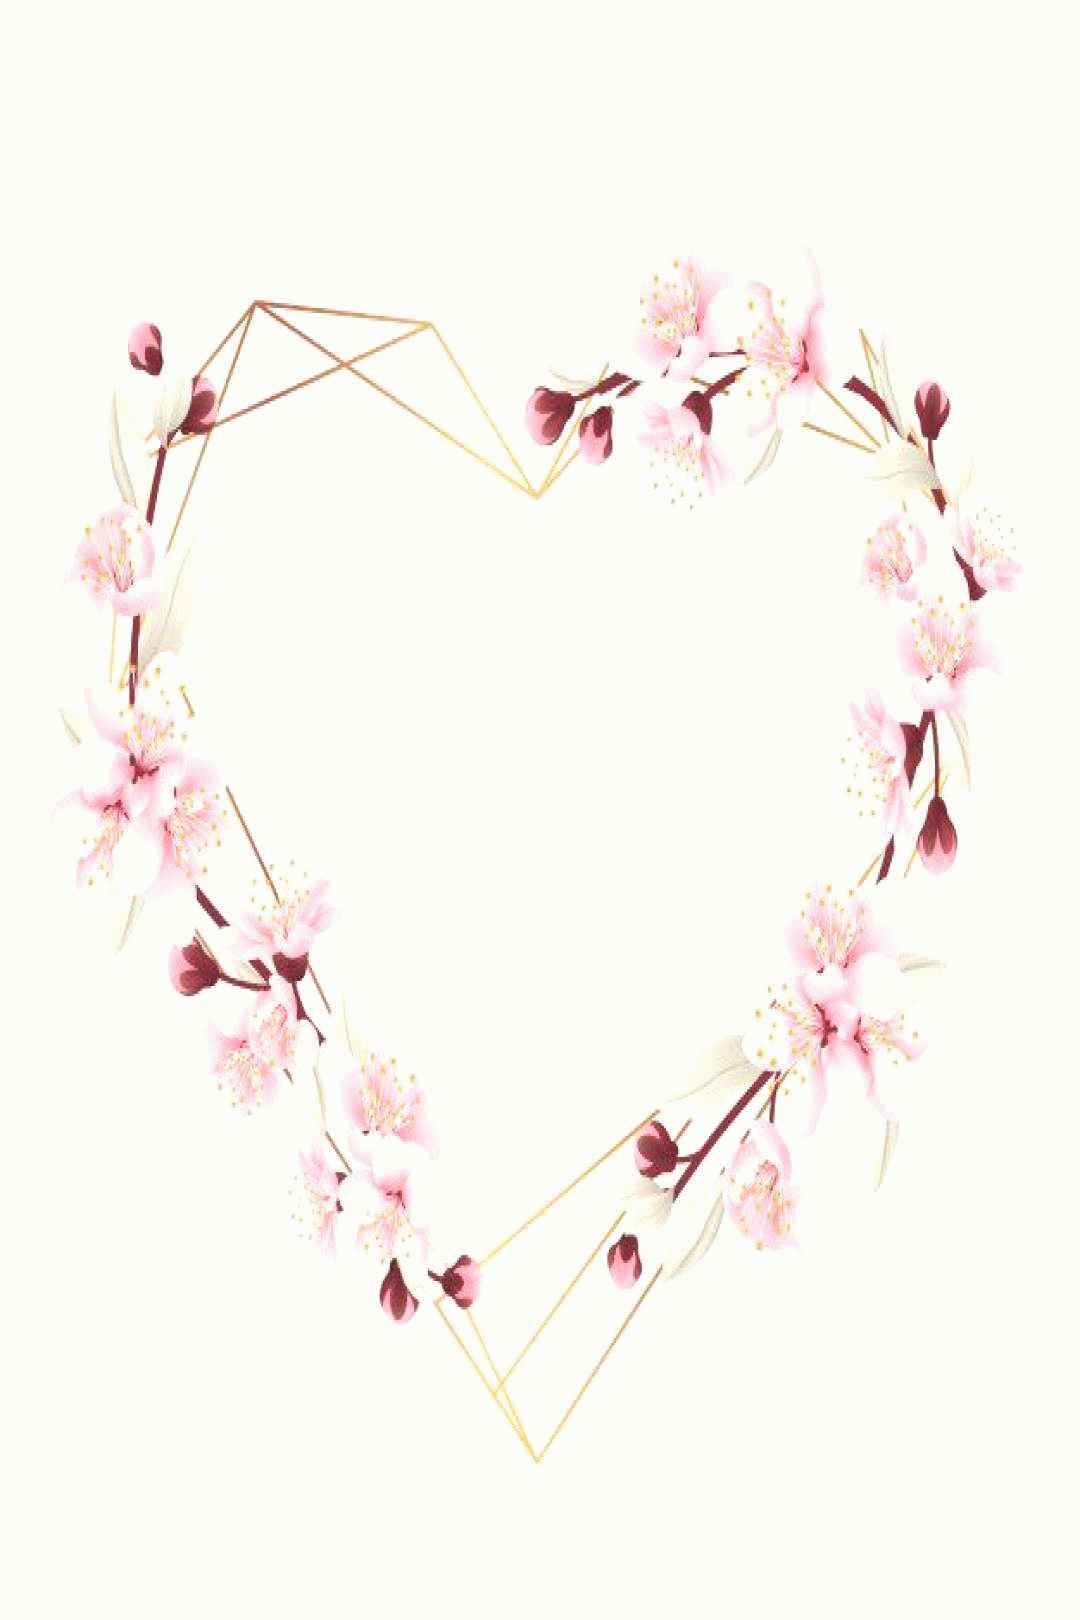 love floral frame background with cherry blossoms download medium